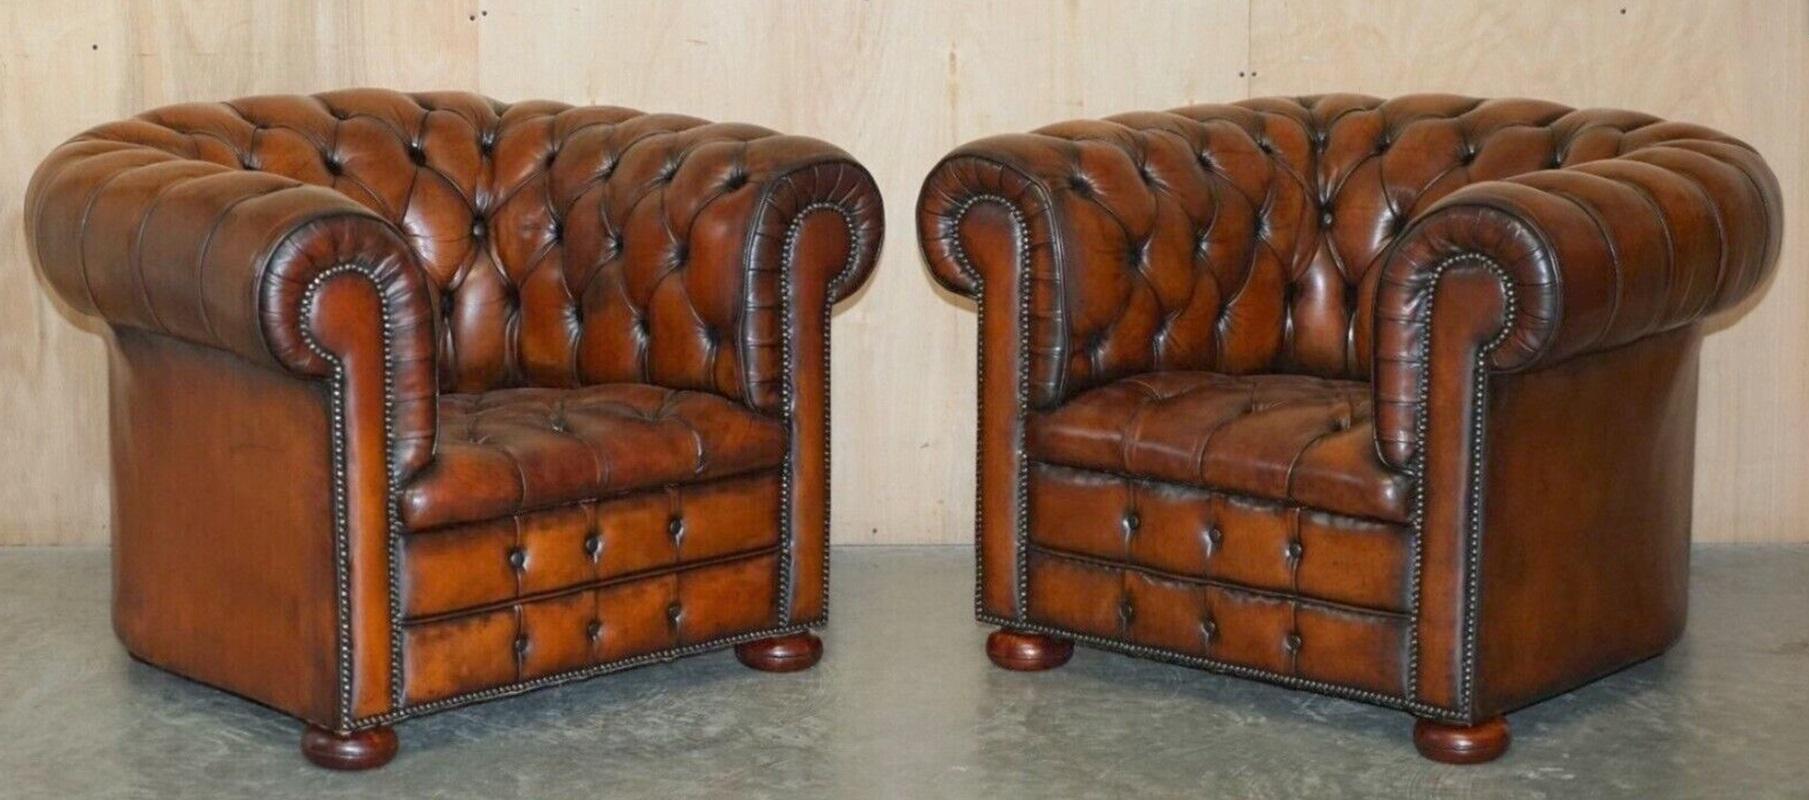 Royal House Antiques

Royal House Antiques is delighted to offer for sale this absolutely stunning pair of original circa 1930's Art Deco, super comfortable hand dyed saddle brown leather club armchairs with Chesterfield tufting

Please note the